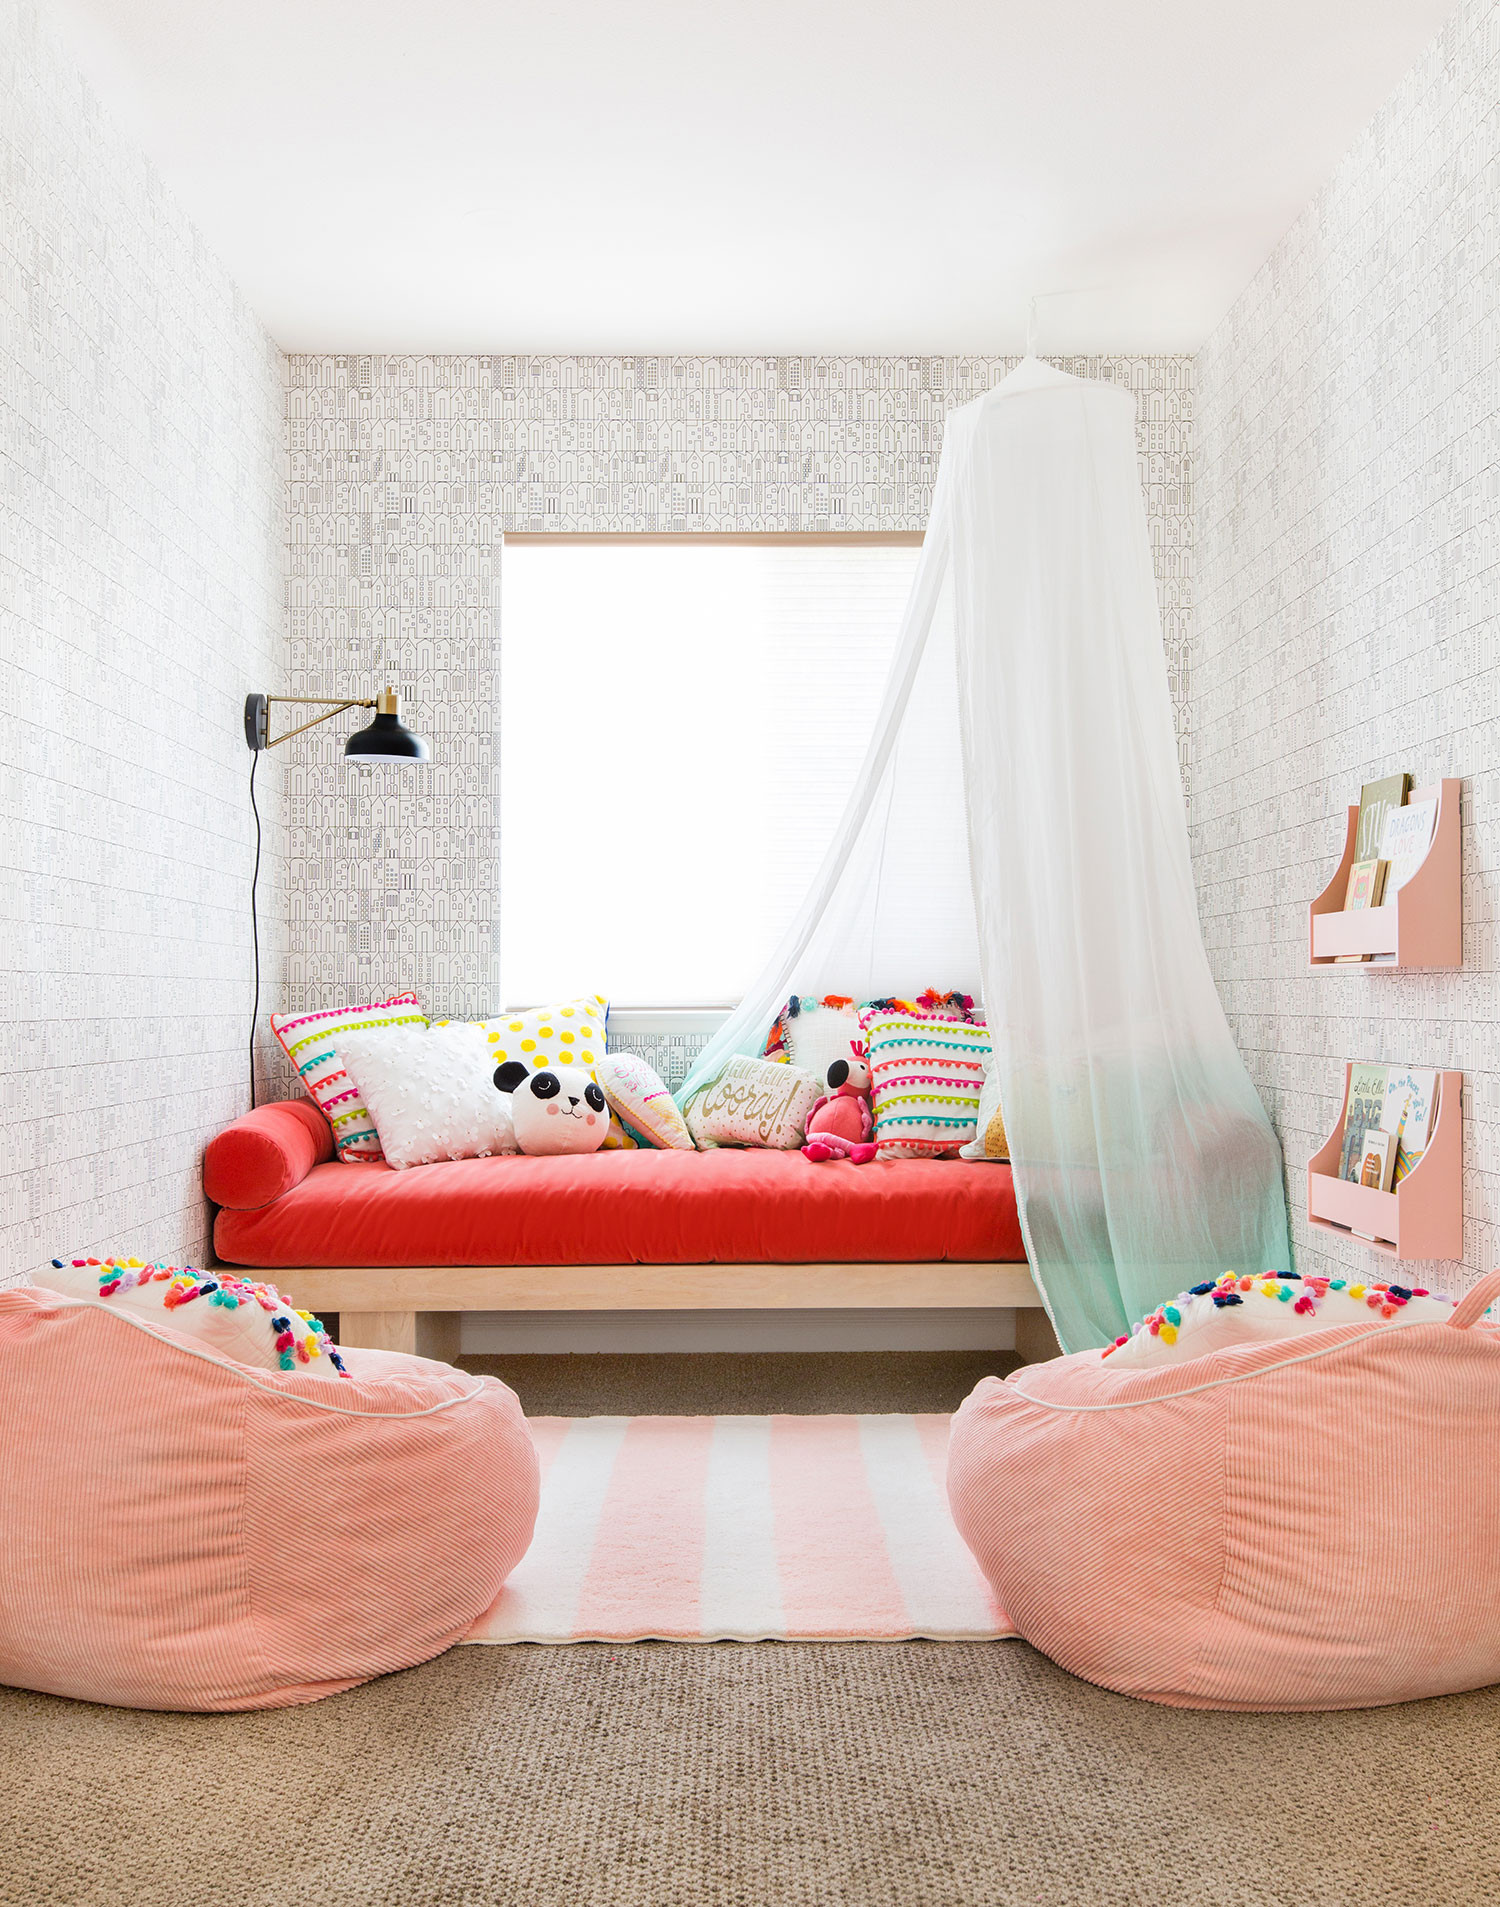 Target Kids Room Decor
 Emily Henderson Transforms a Playroom with the Pillowfort